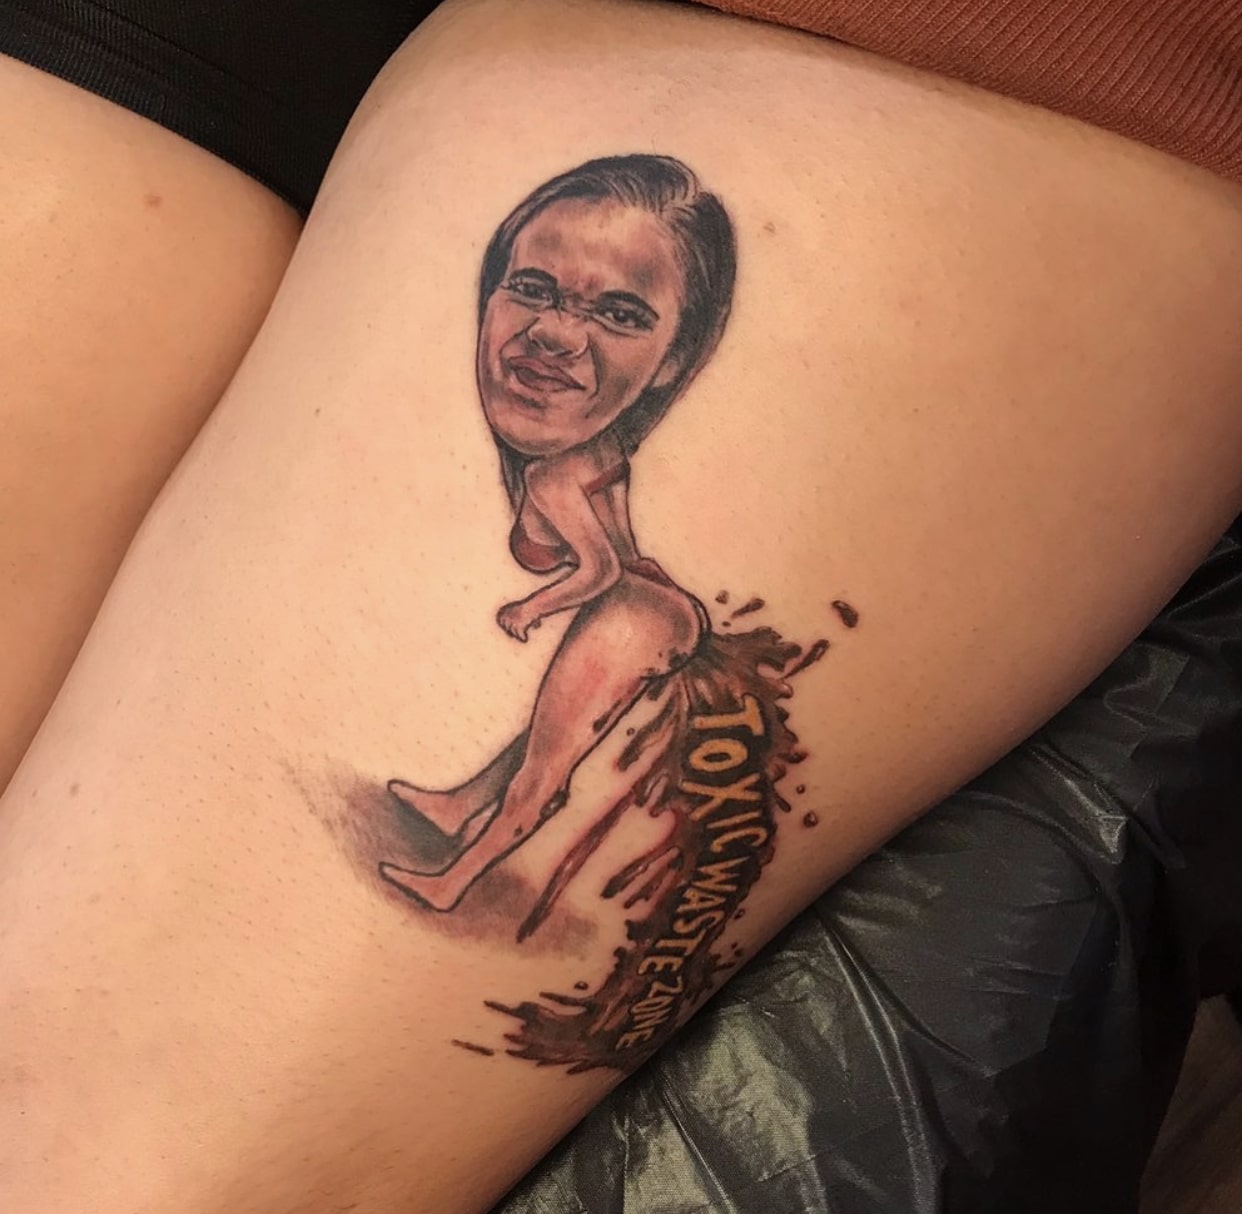 21 People Who Fell Victim to Poor Tattoo Artists